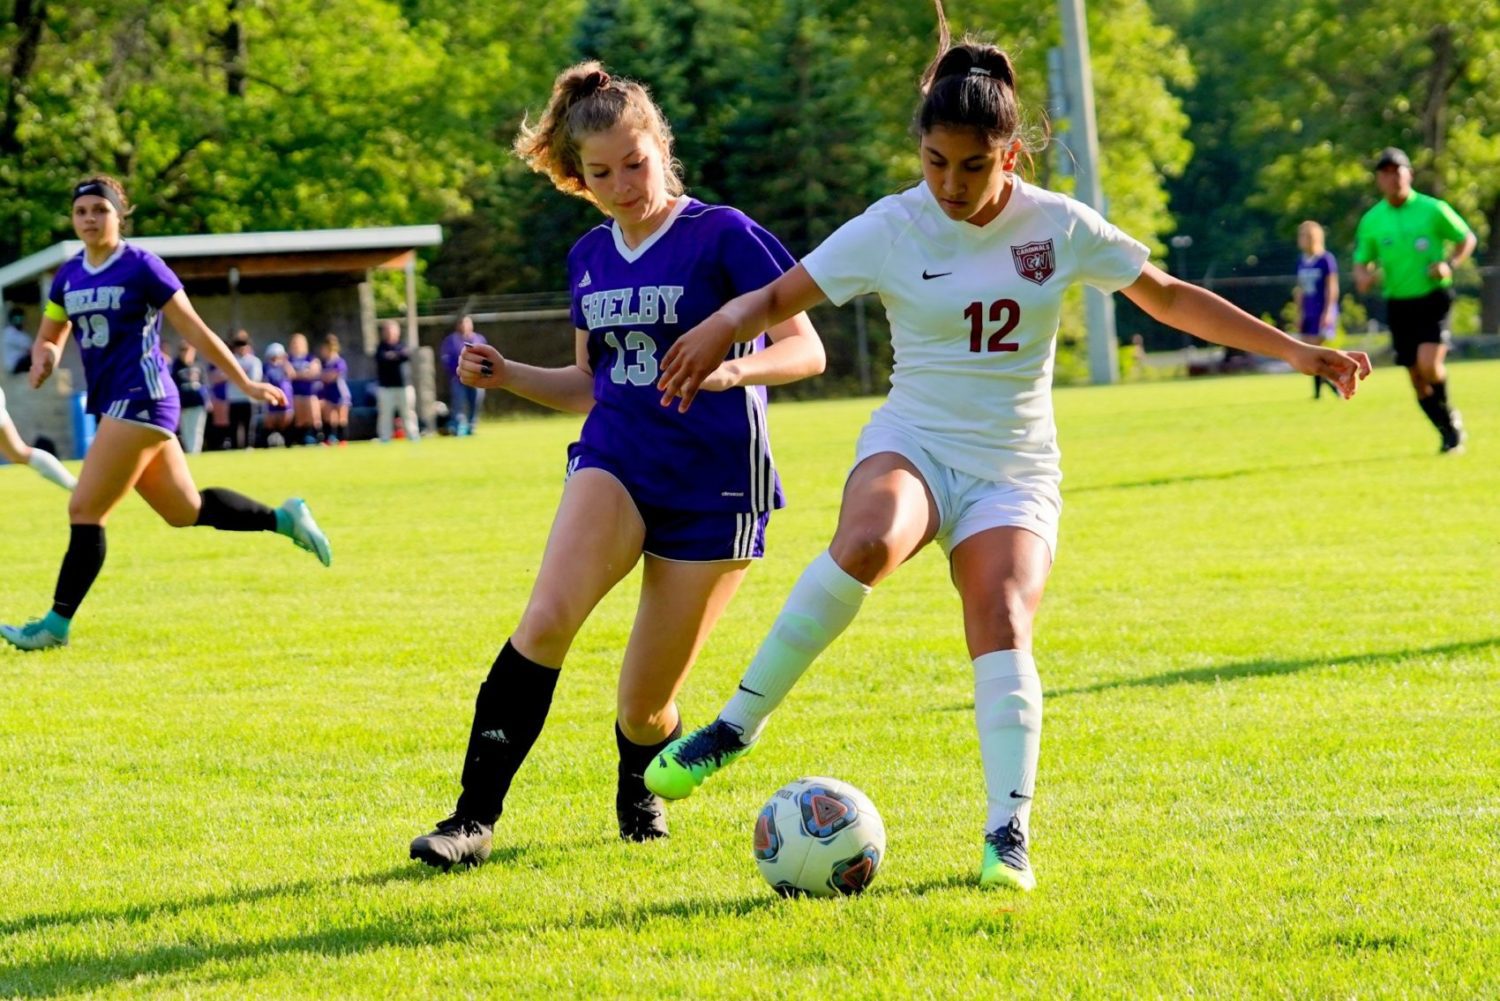 Jones and Mendiola score goals for Orchard View as Cardinals shutout Shelby 2-0 in Wednesday soccer action